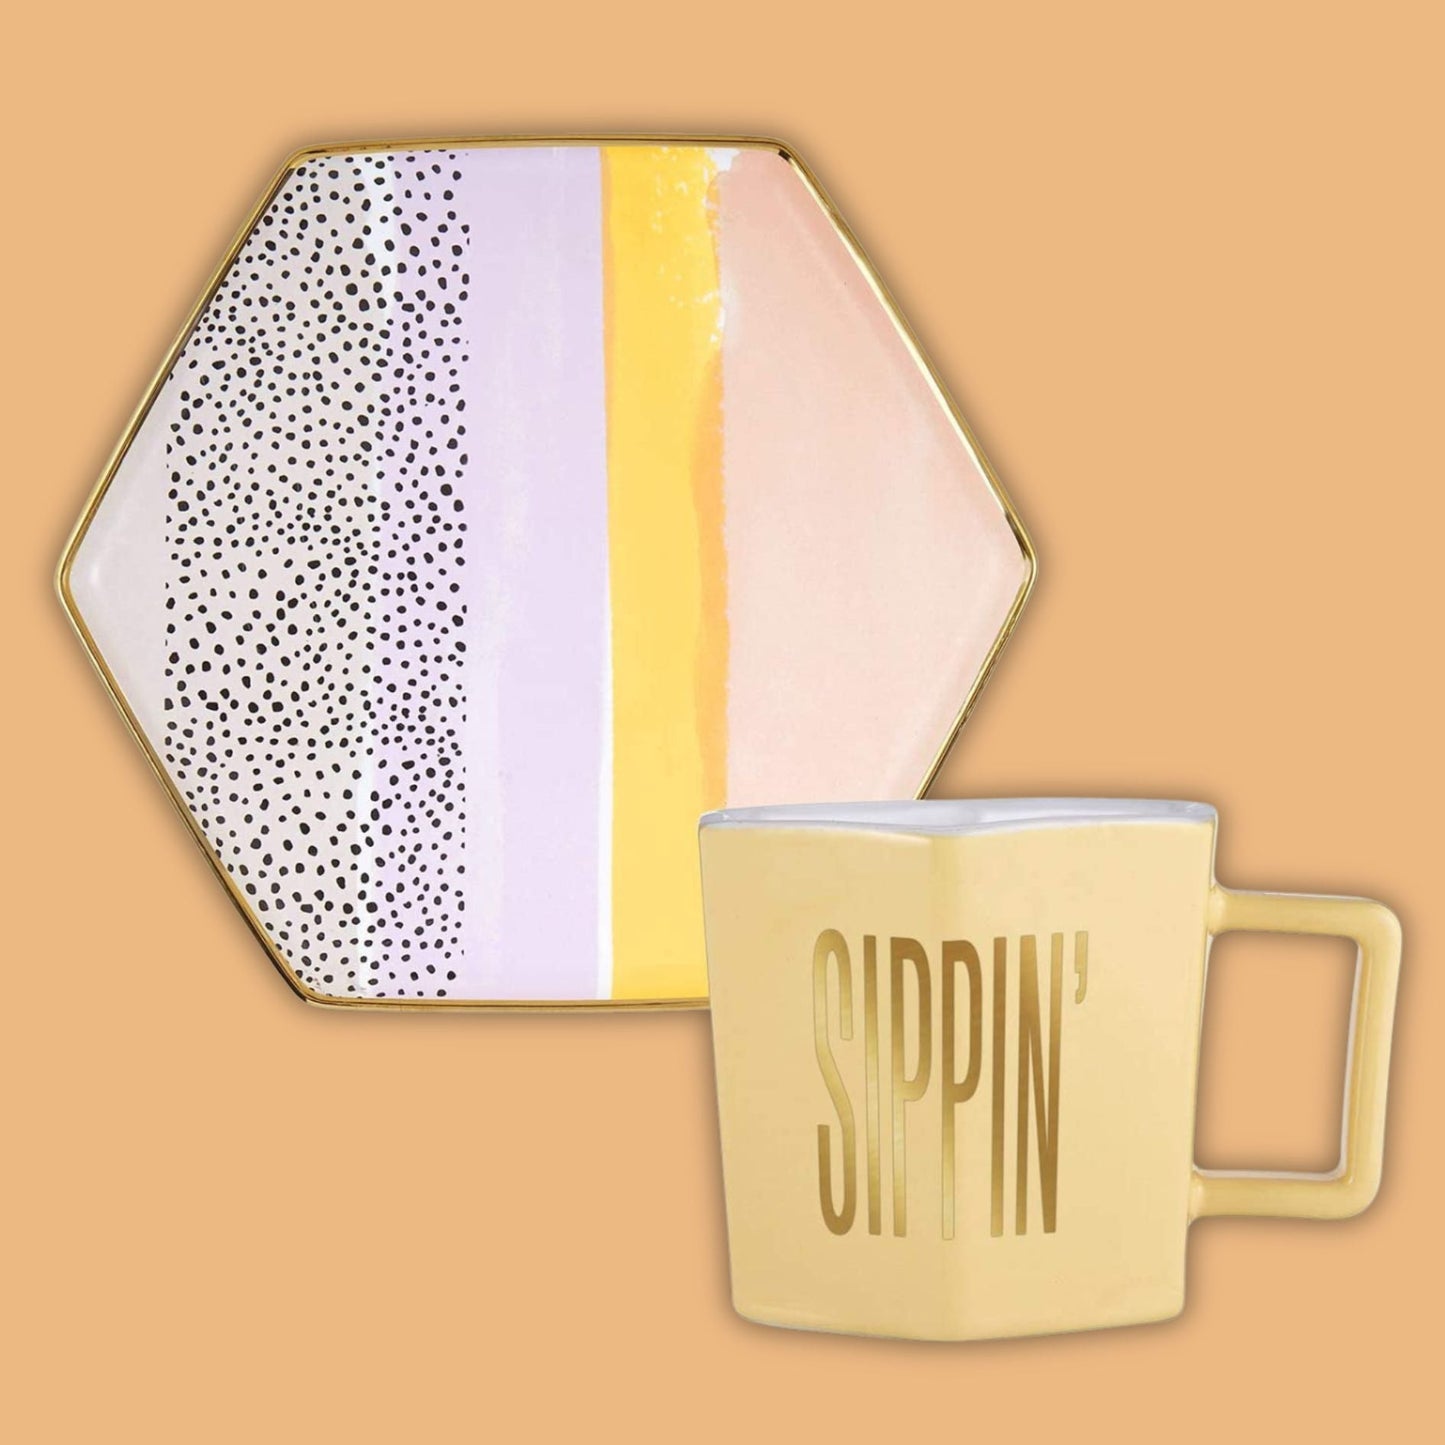 Sippin' Hexagon Mug and Saucer Set in Peach, Black Dot, and Honey